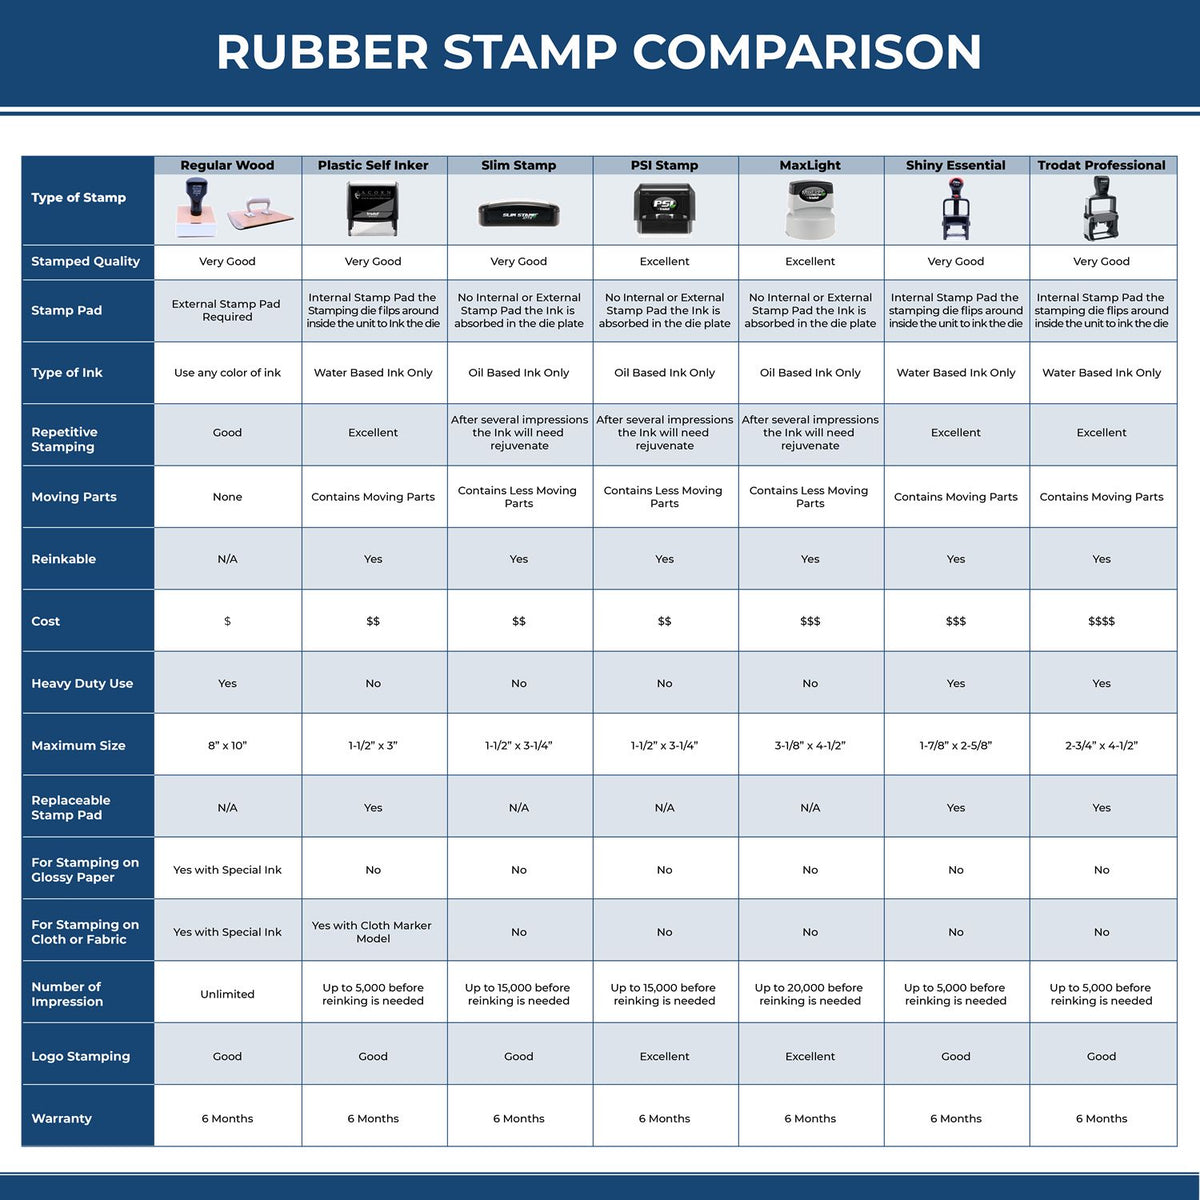 Large Received with In Box Icon Rubber Stamp 4907R Rubber Stamp Comparison